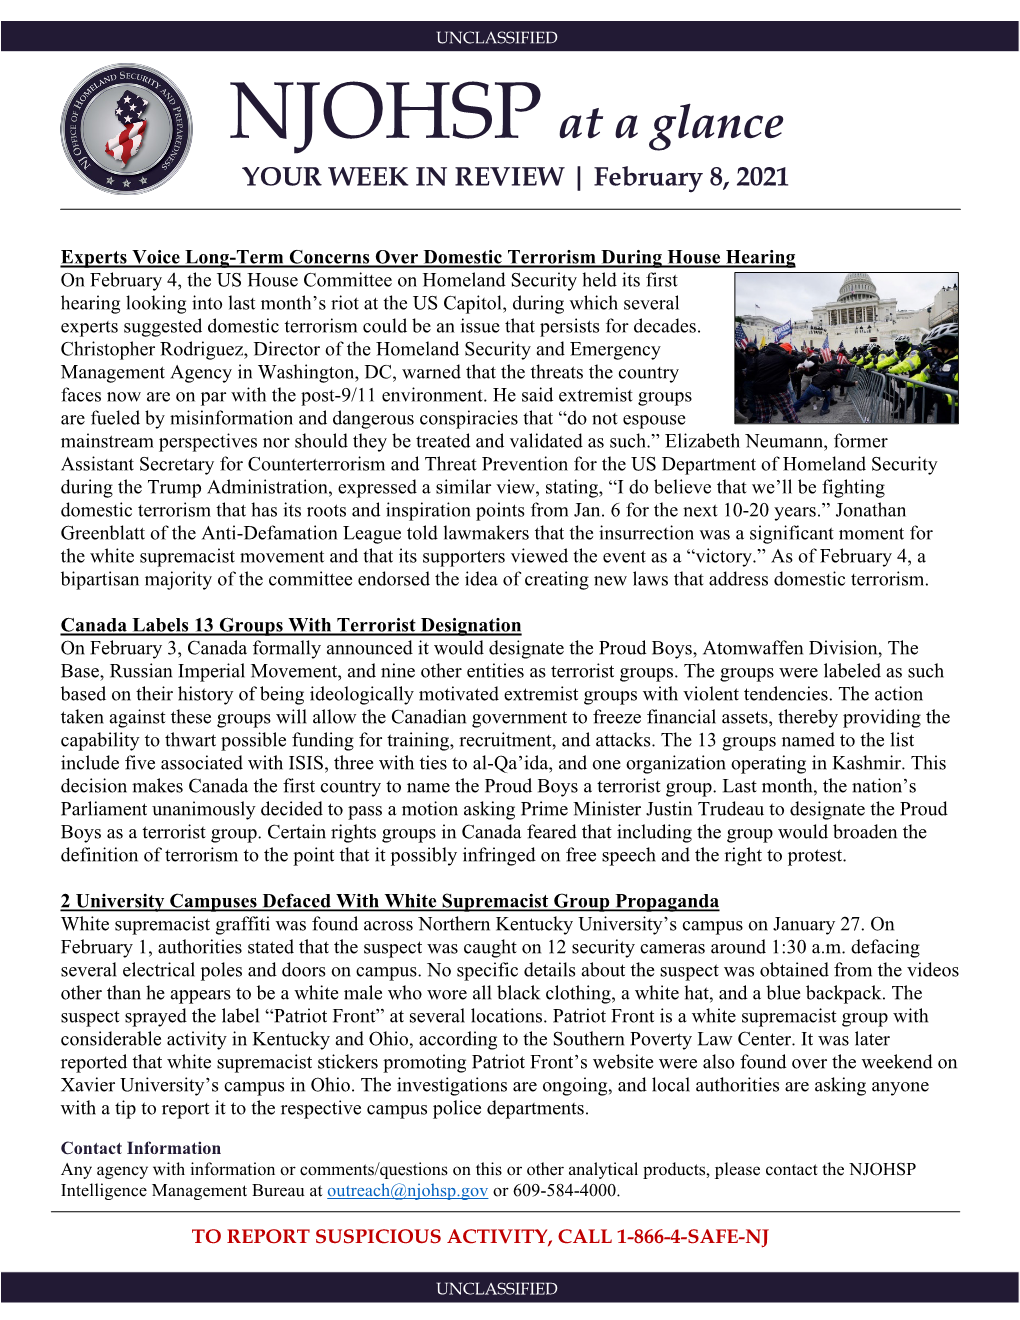 NJOHSP at a Glance YOUR WEEK in REVIEW | February 8, 2021